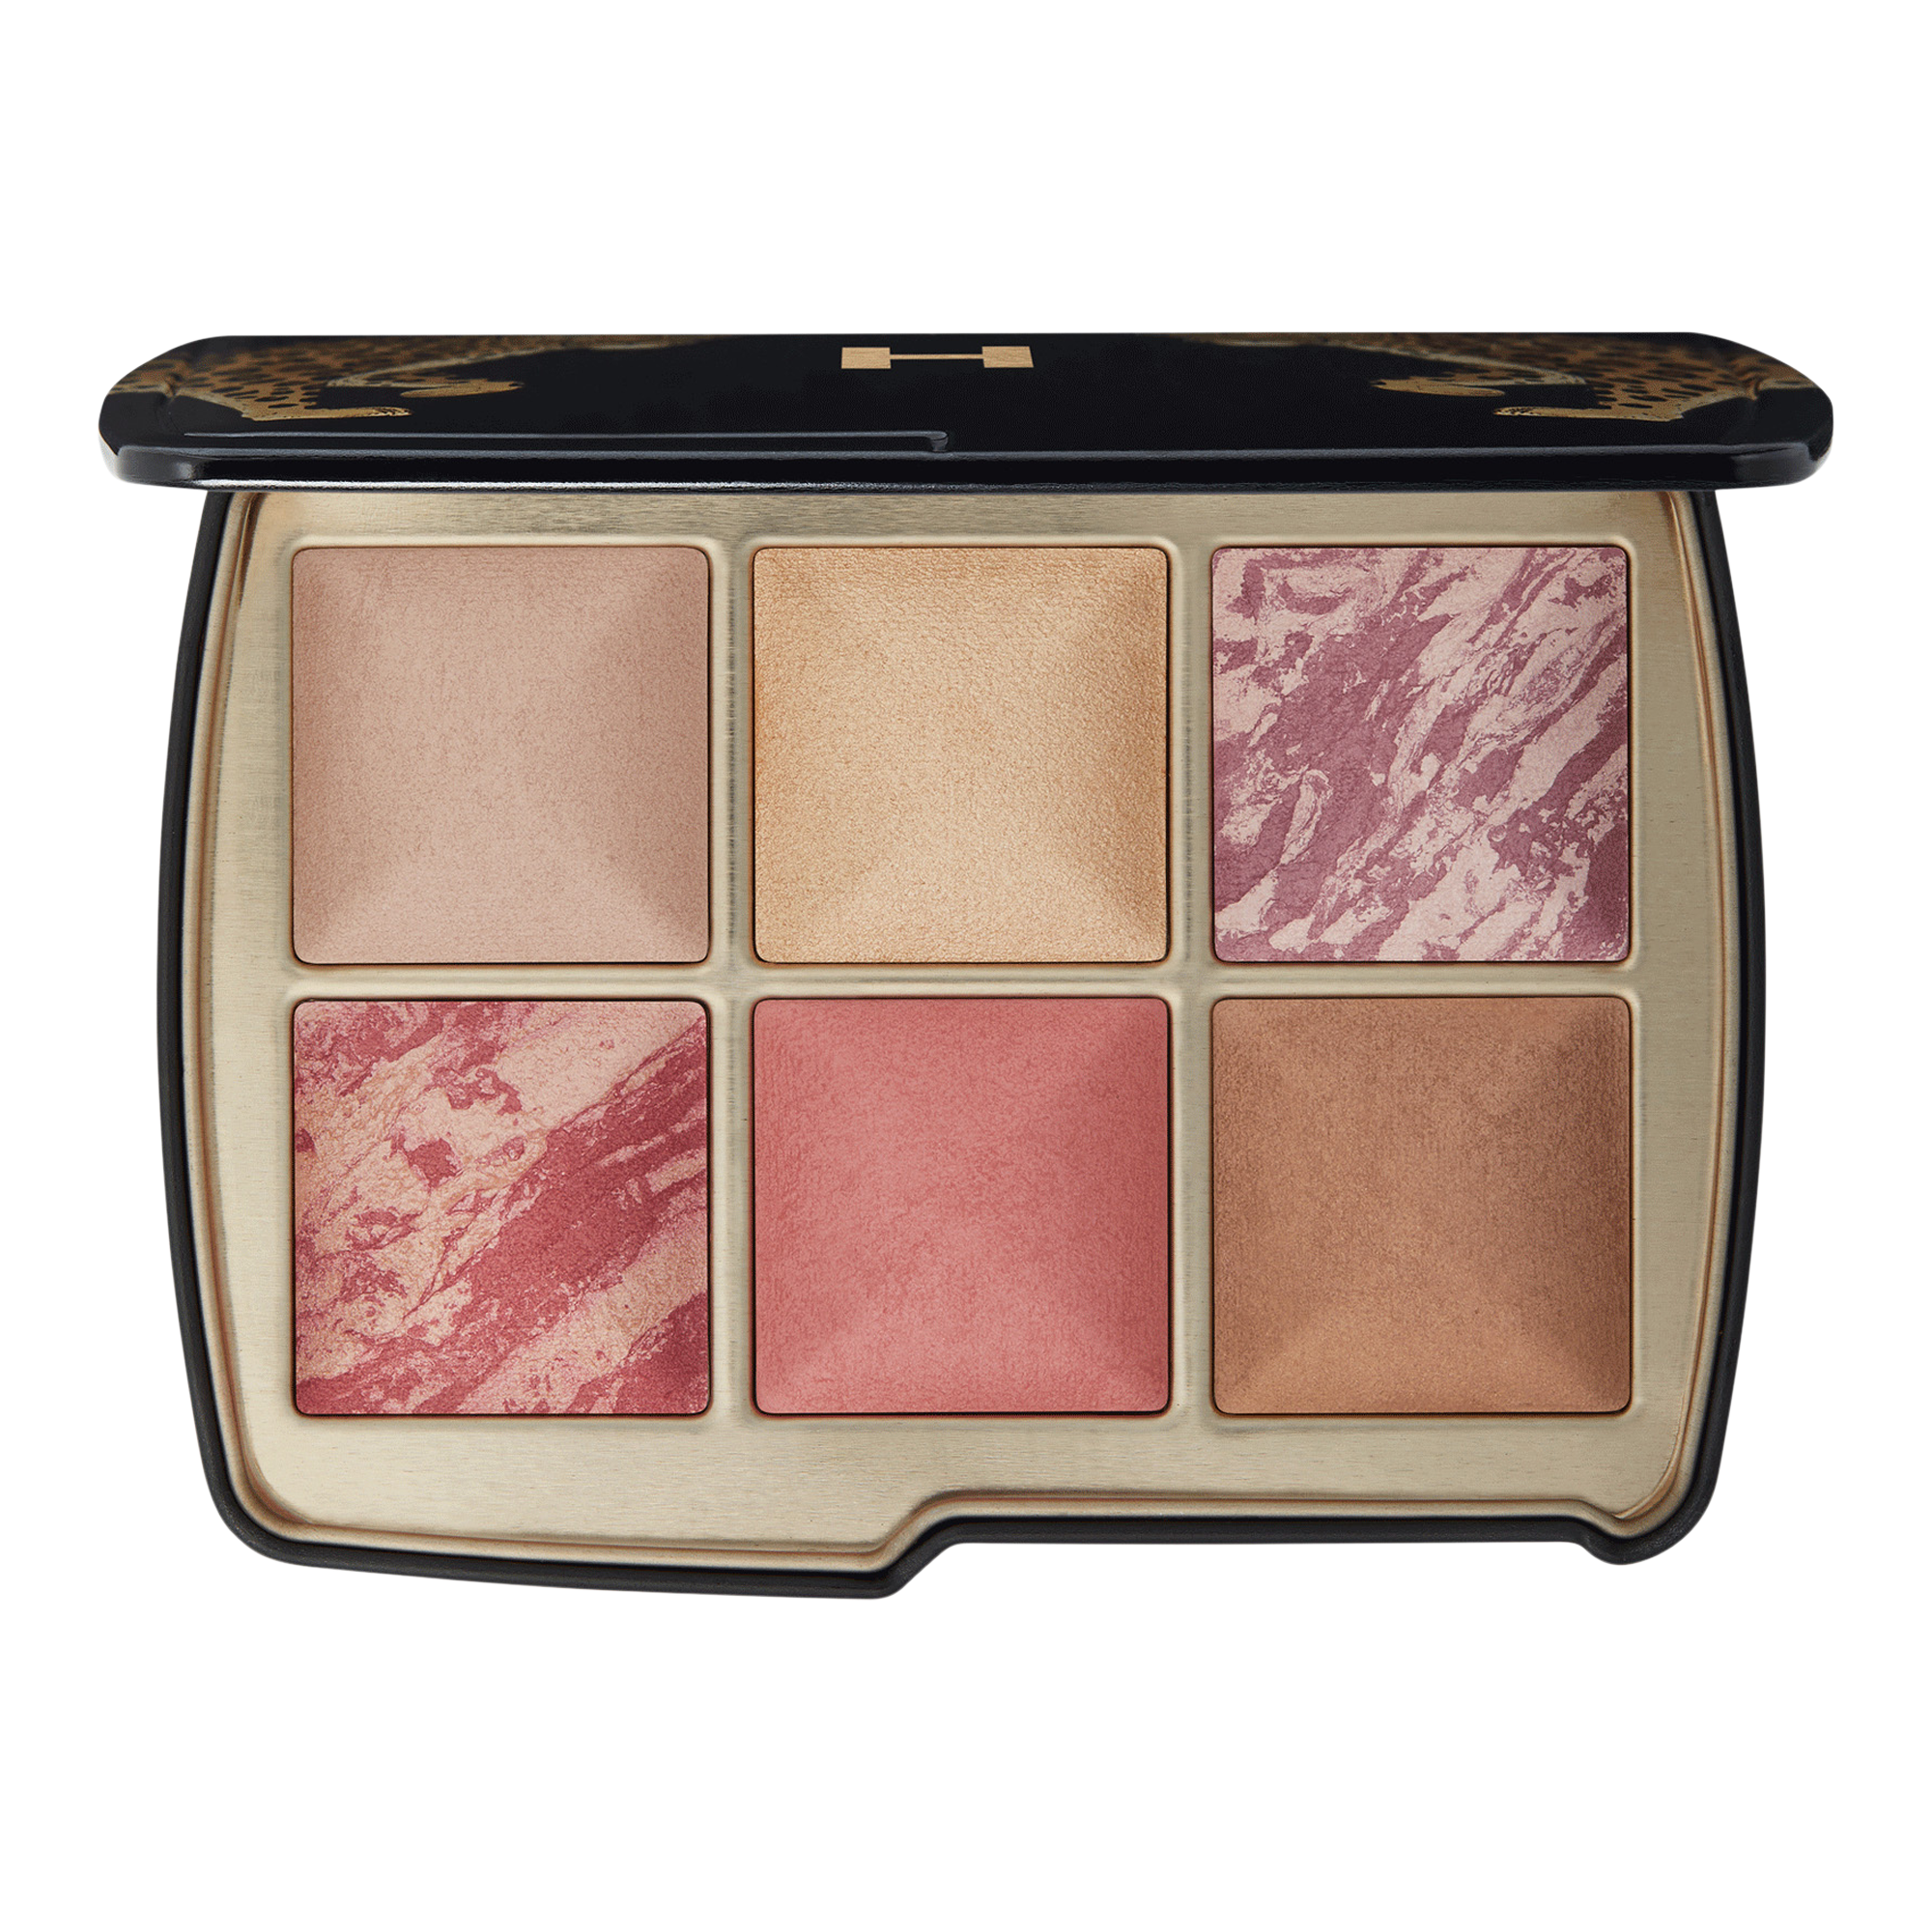 HOURGLASS Ambient Light Holiday Palettes